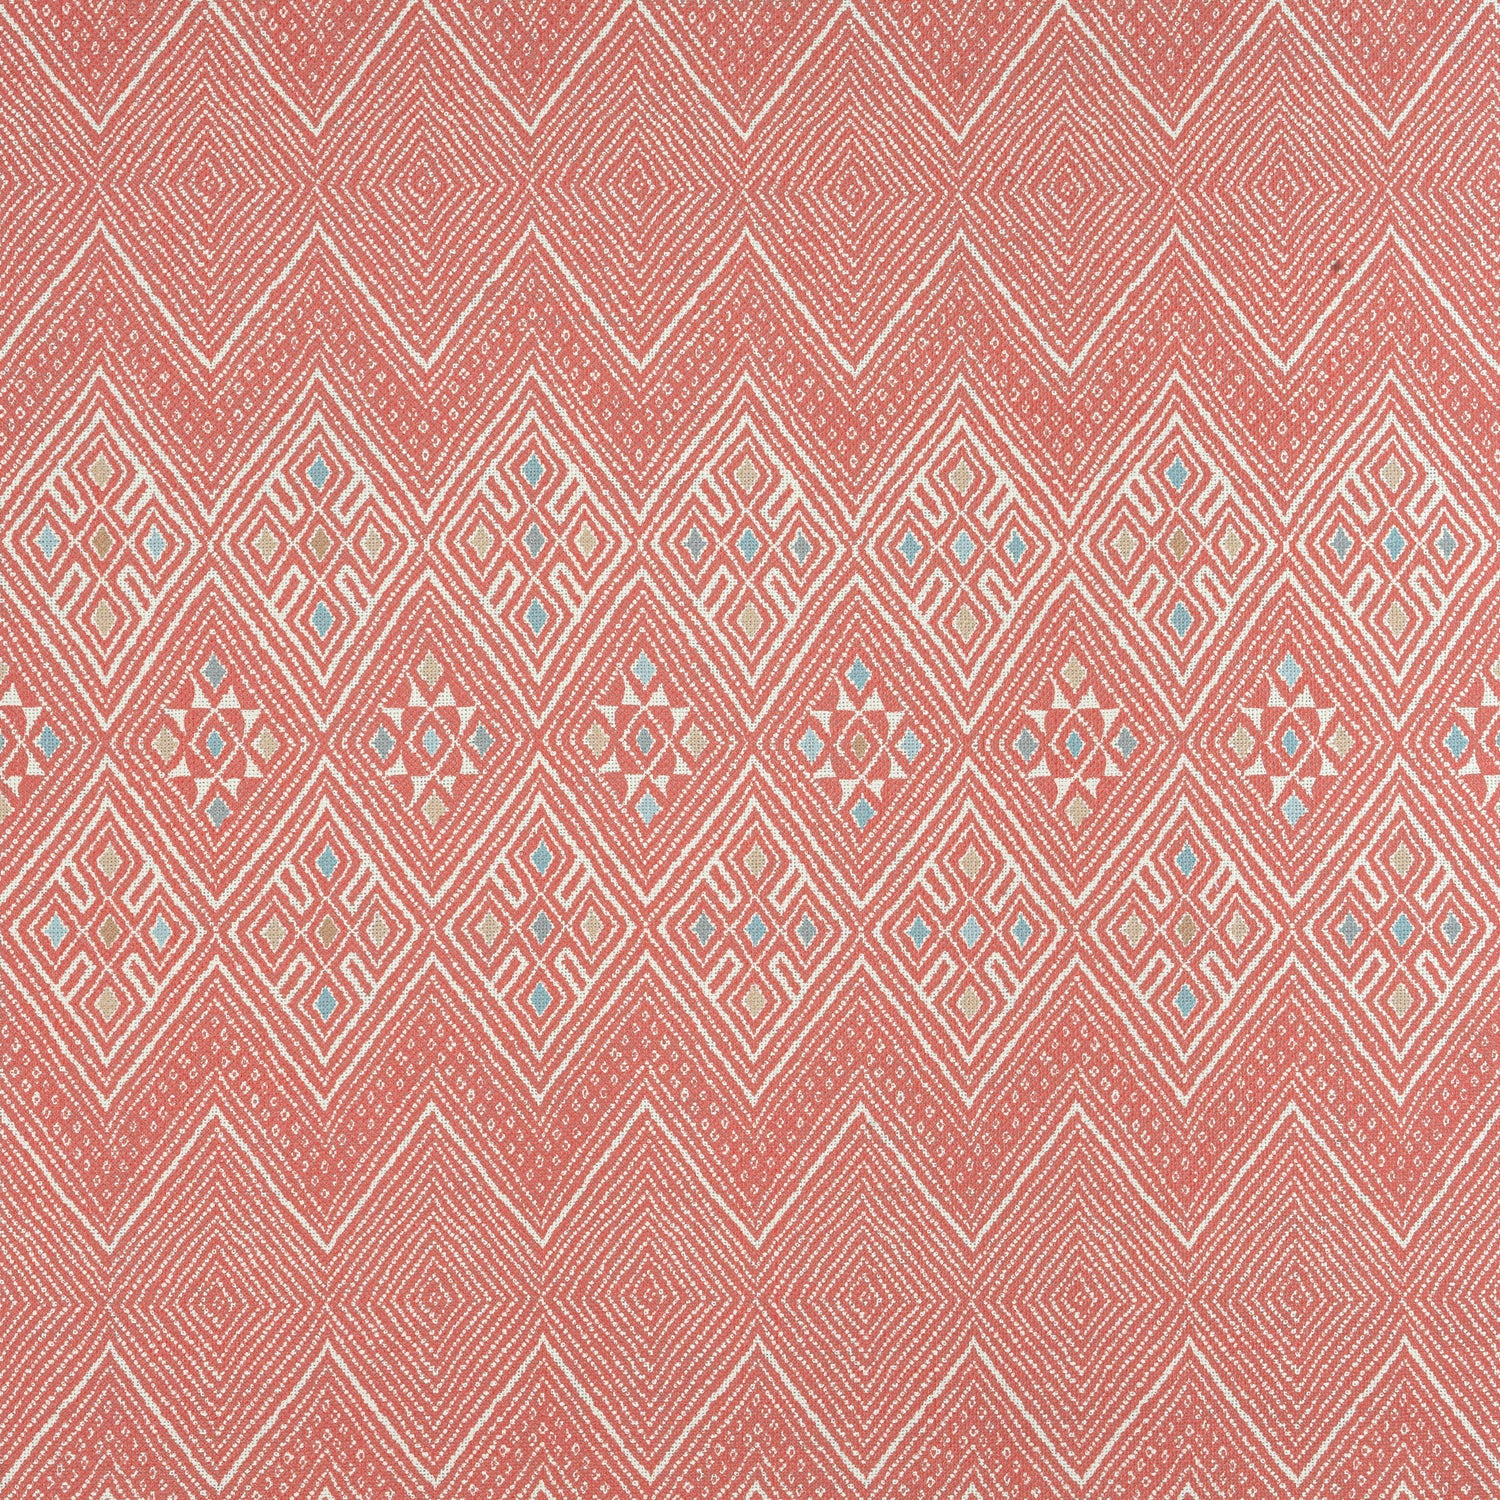 High Plains fabric in coral color - pattern number F913230 - by Thibaut in the Mesa collection